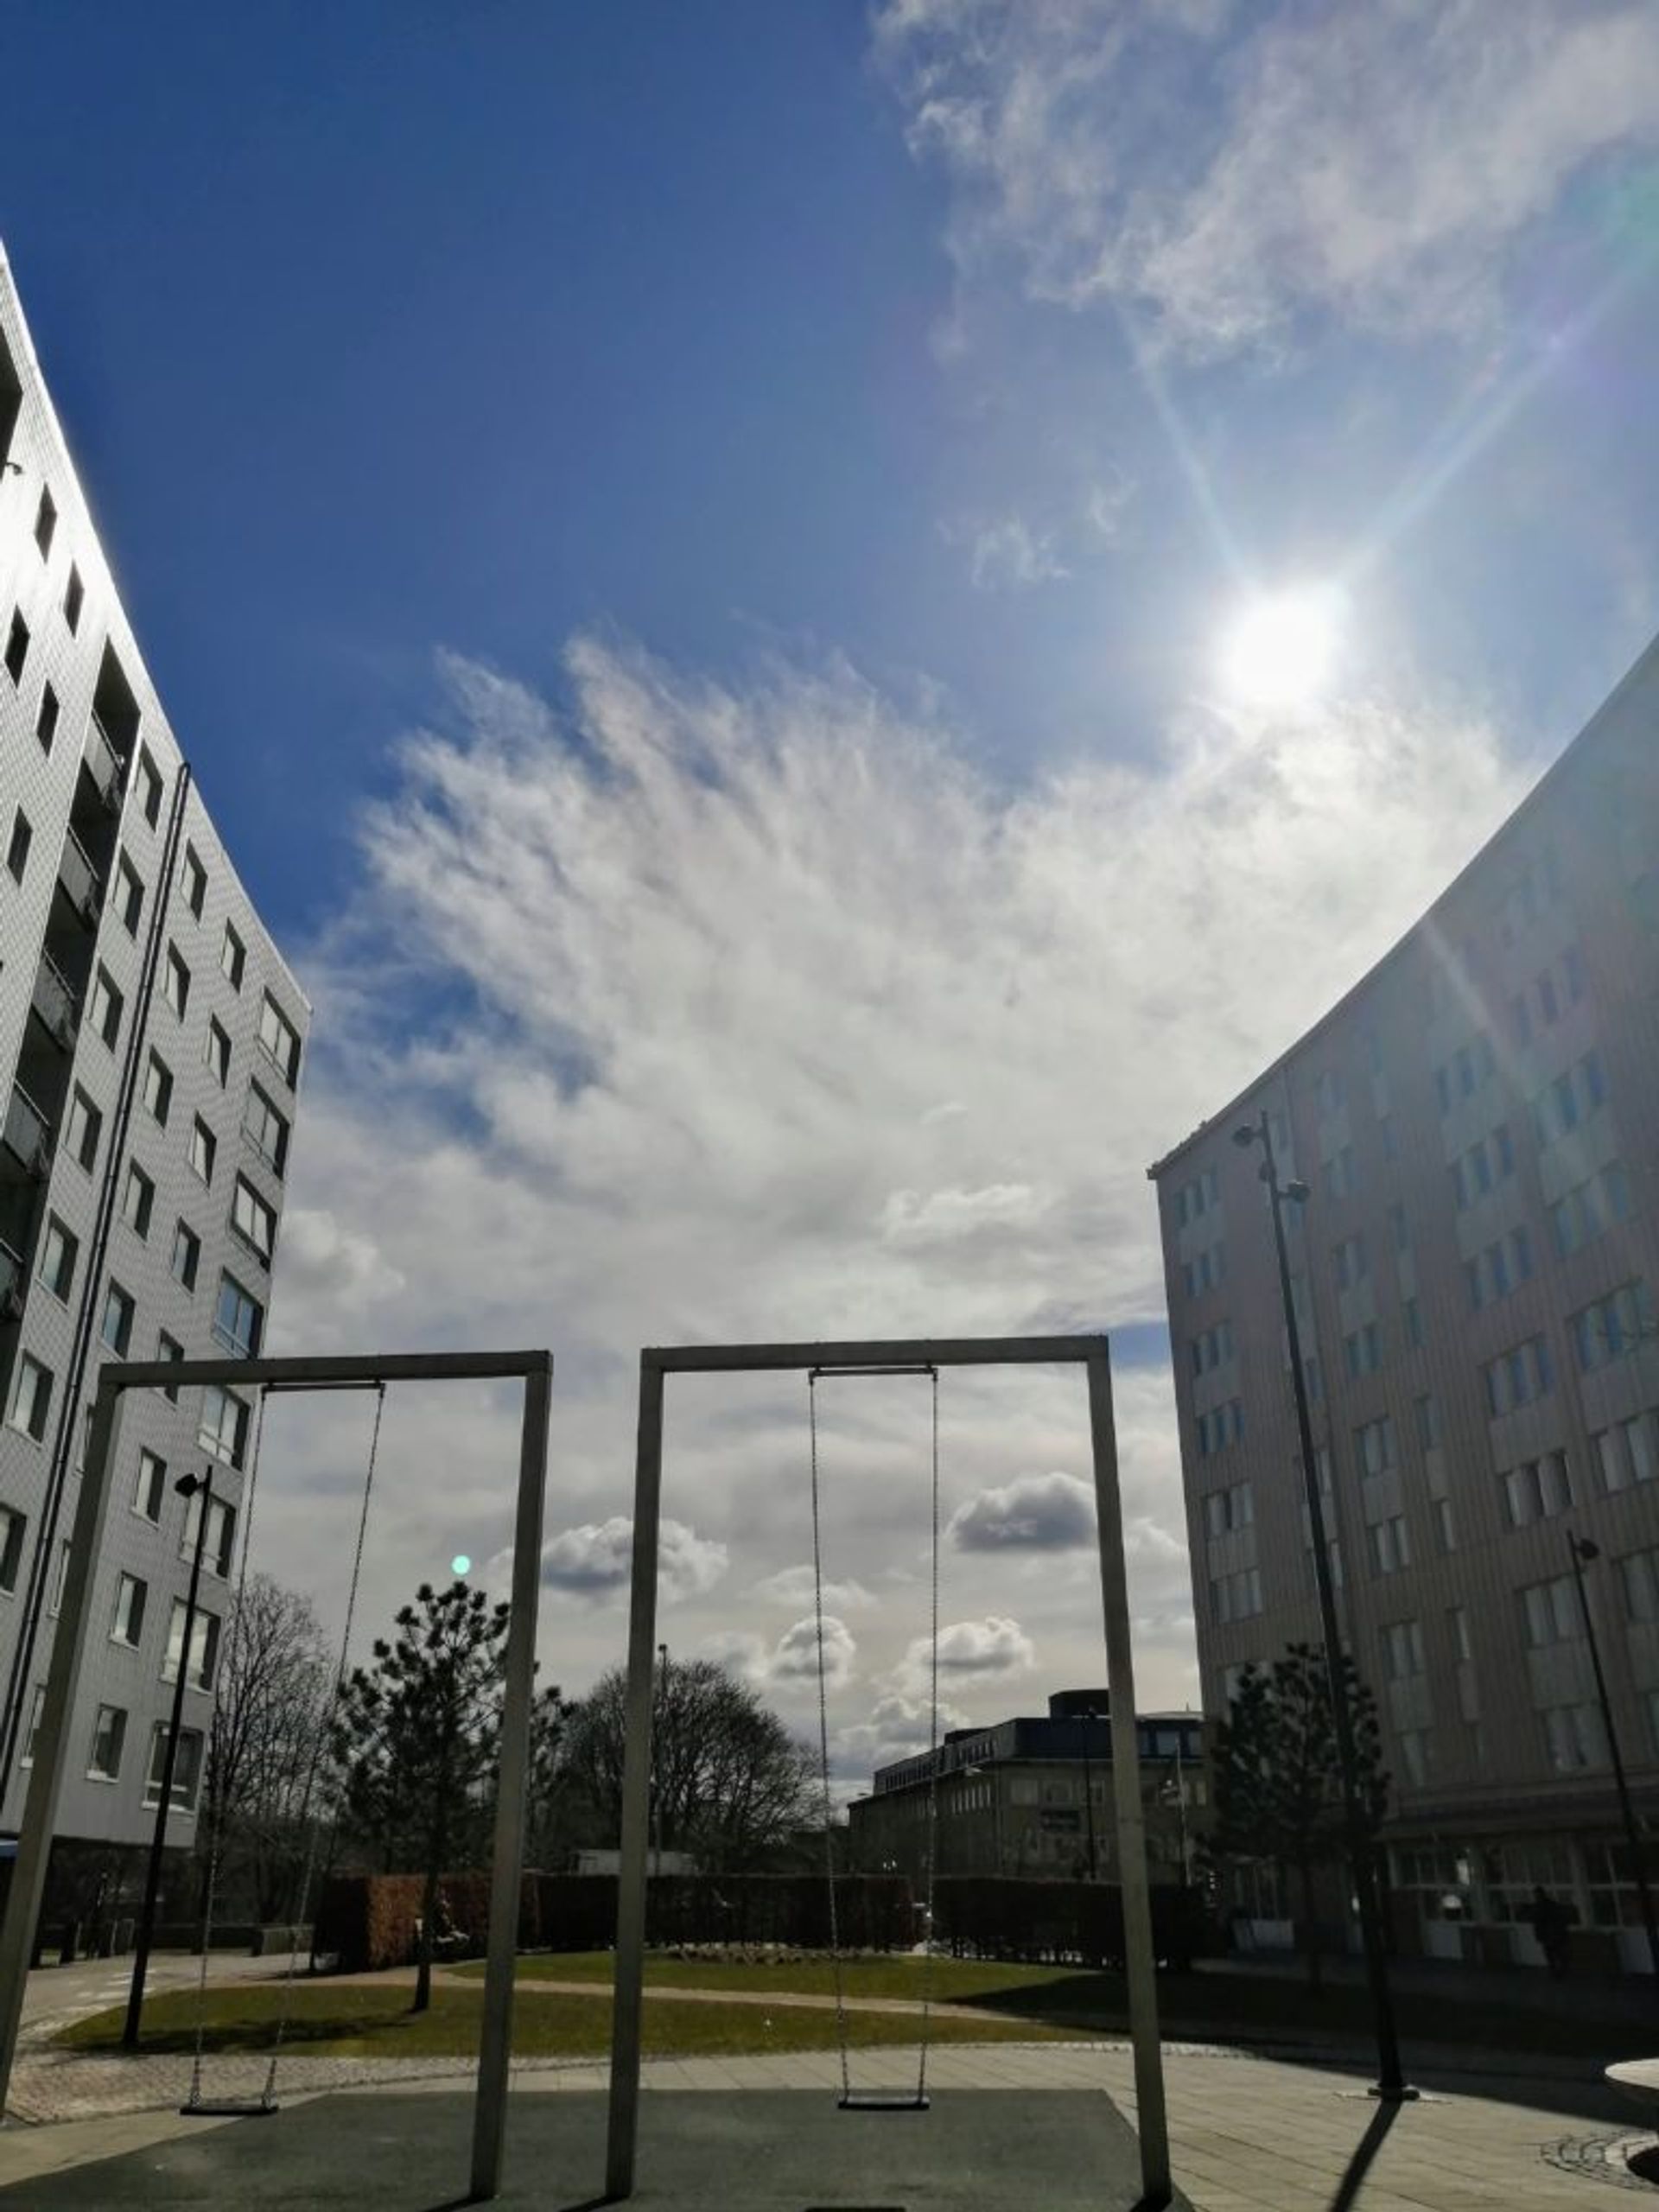 A swing set in between two tall apartment buildings with clouds overhead passing to reveal the sun